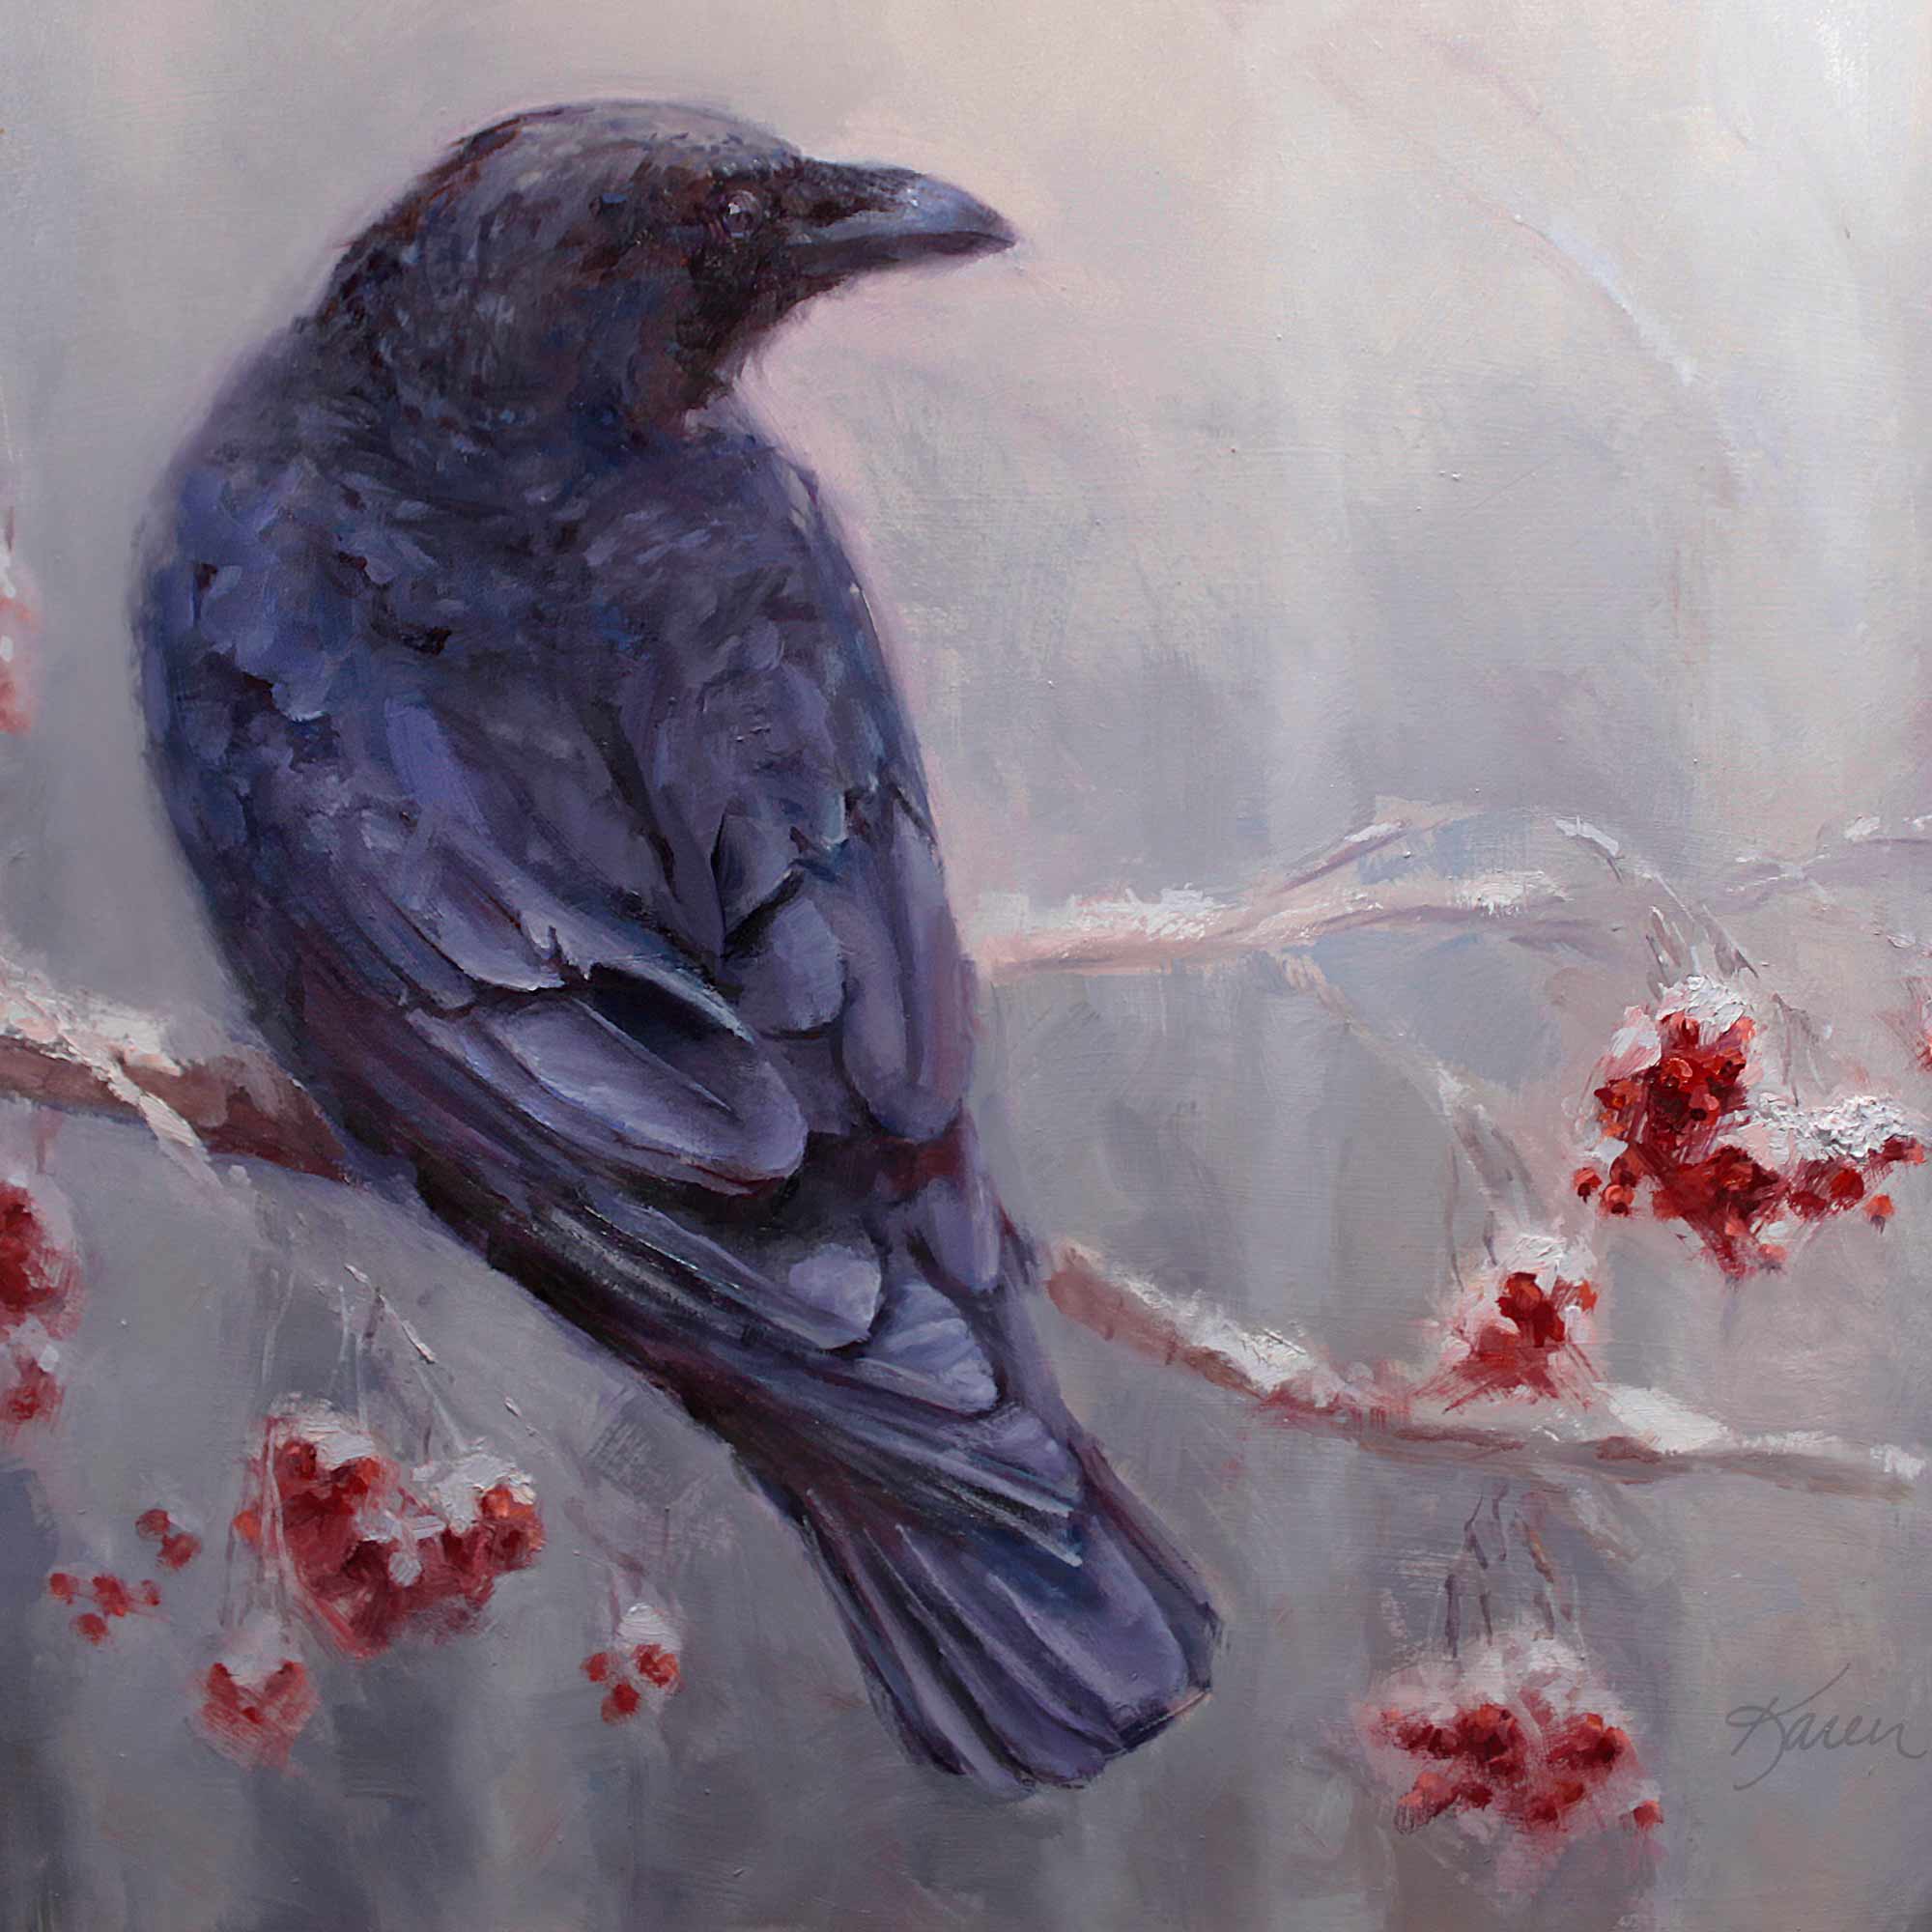 Winter bird painting of black raven on snowy branch with red berries. The artwork is created in soft neutral grey tones. This wall art print was painted by artist Karen Whitworth.